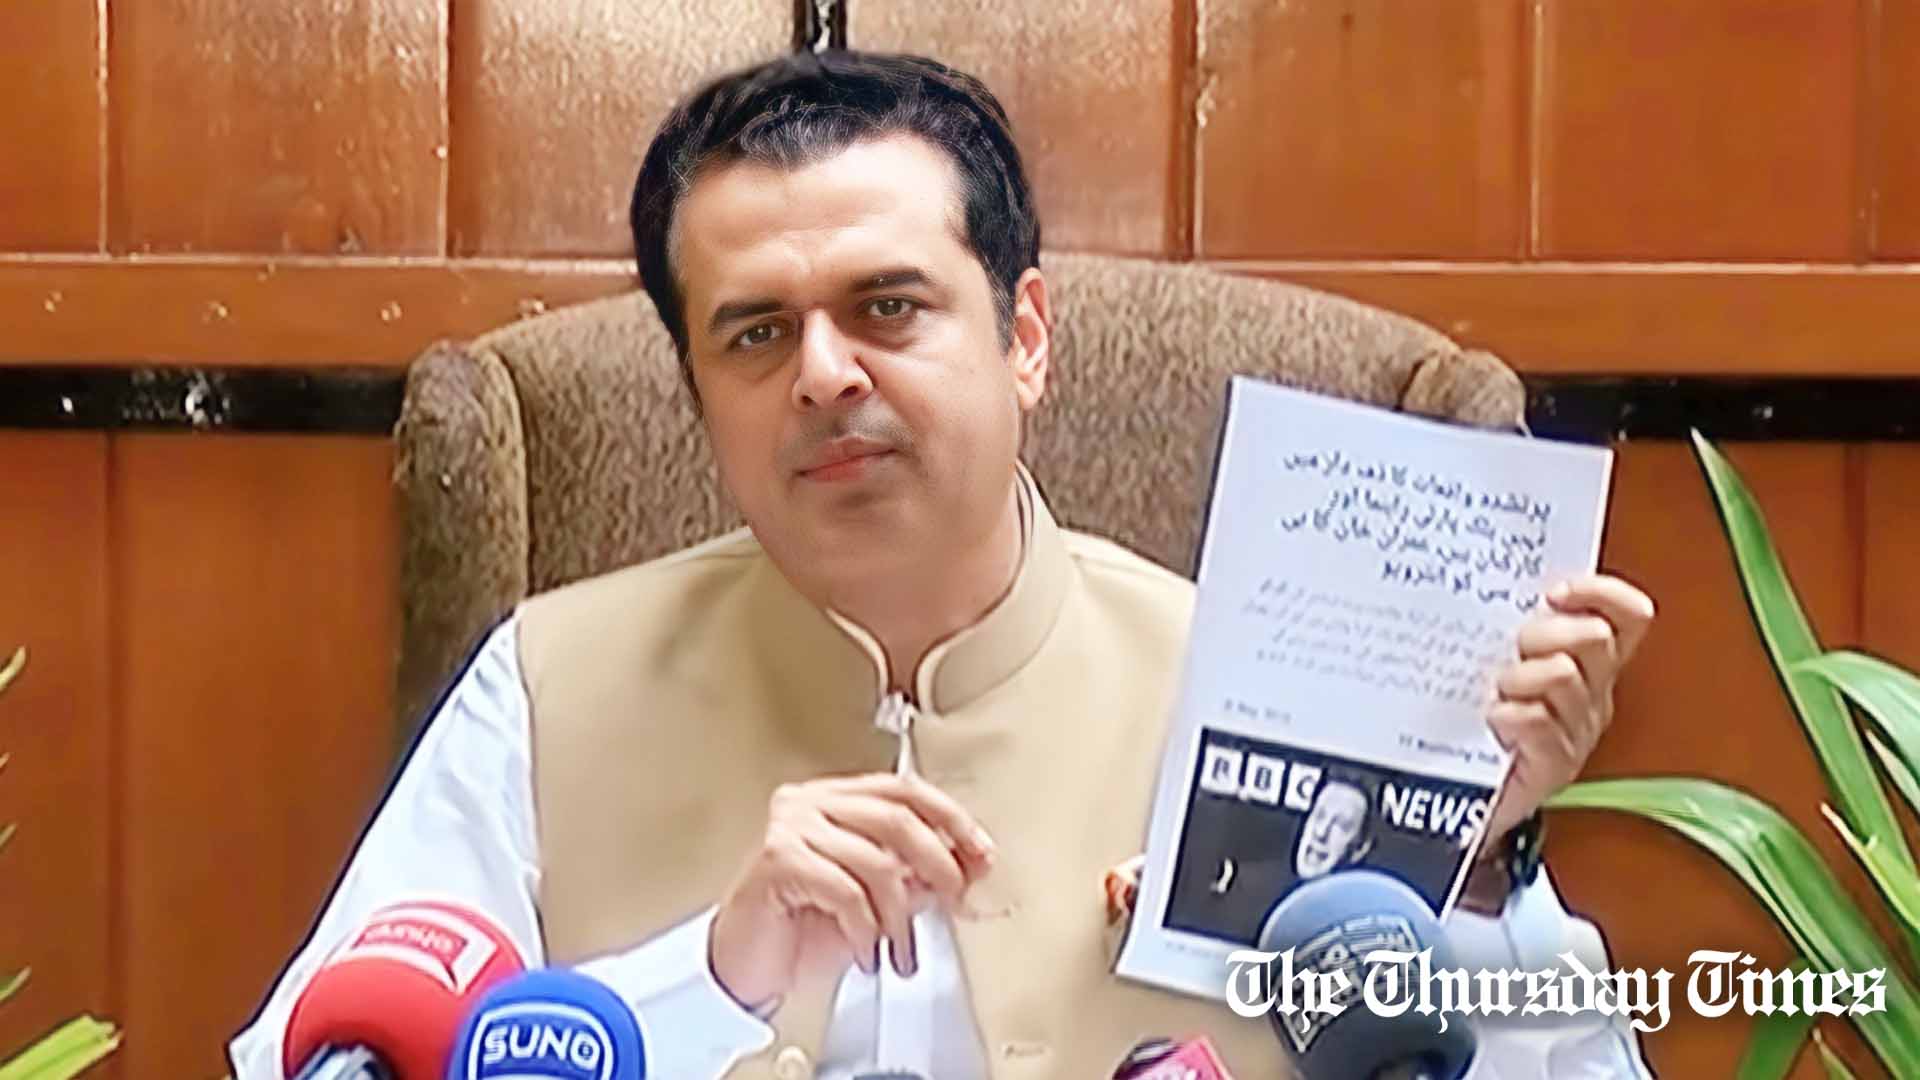 A file photo is shown of former MNA Talal Chaudhry addressing a press conference. — FILE/THE THURSDAY TIMES